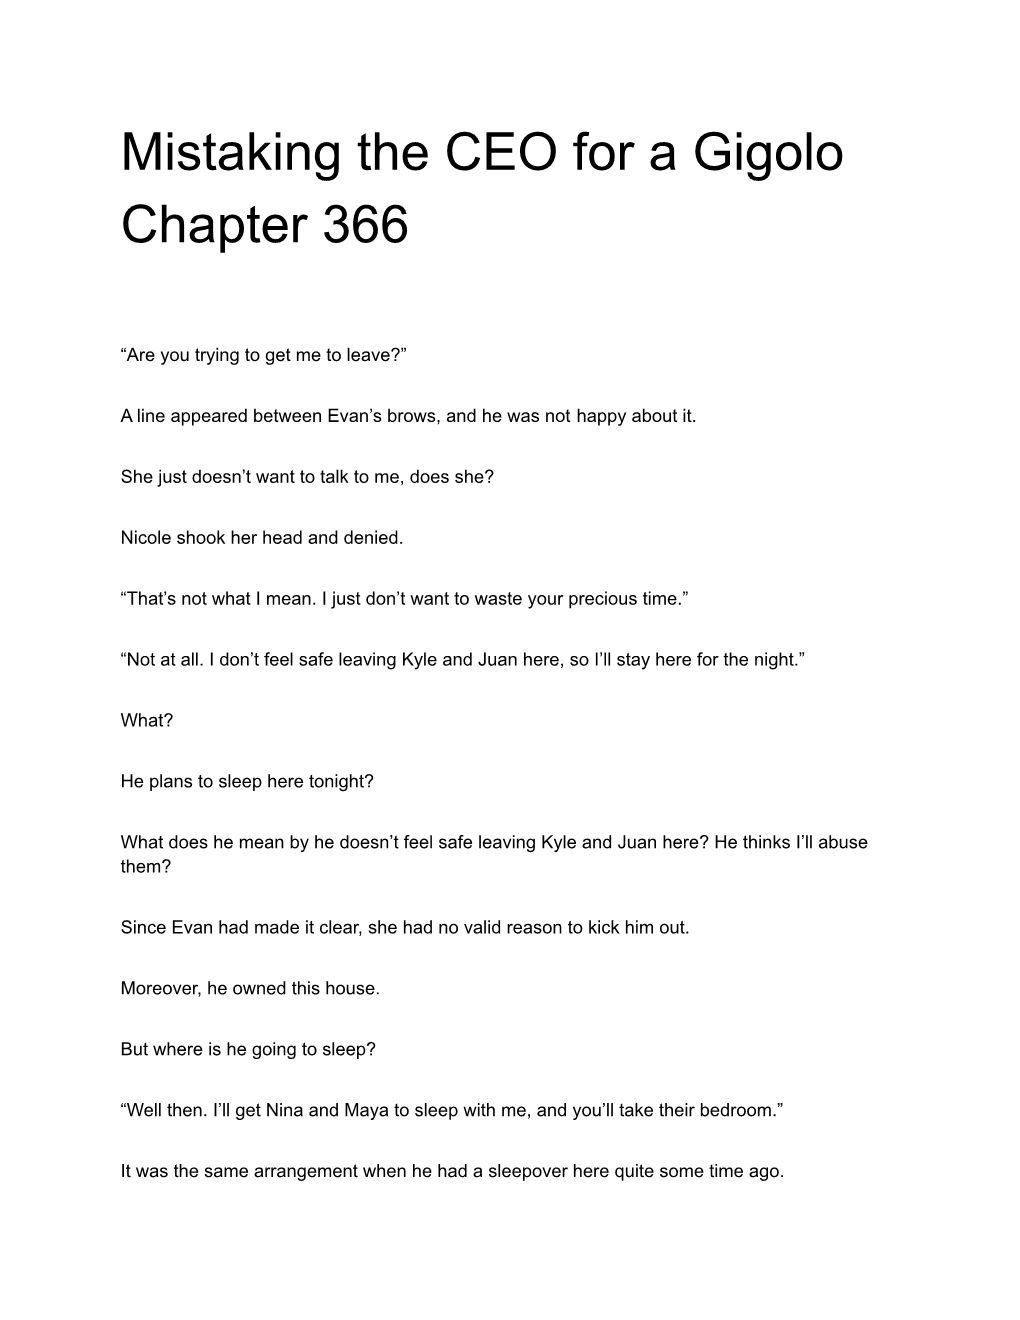 Mistaking the CEO for a Gigolo Chapter 366-370